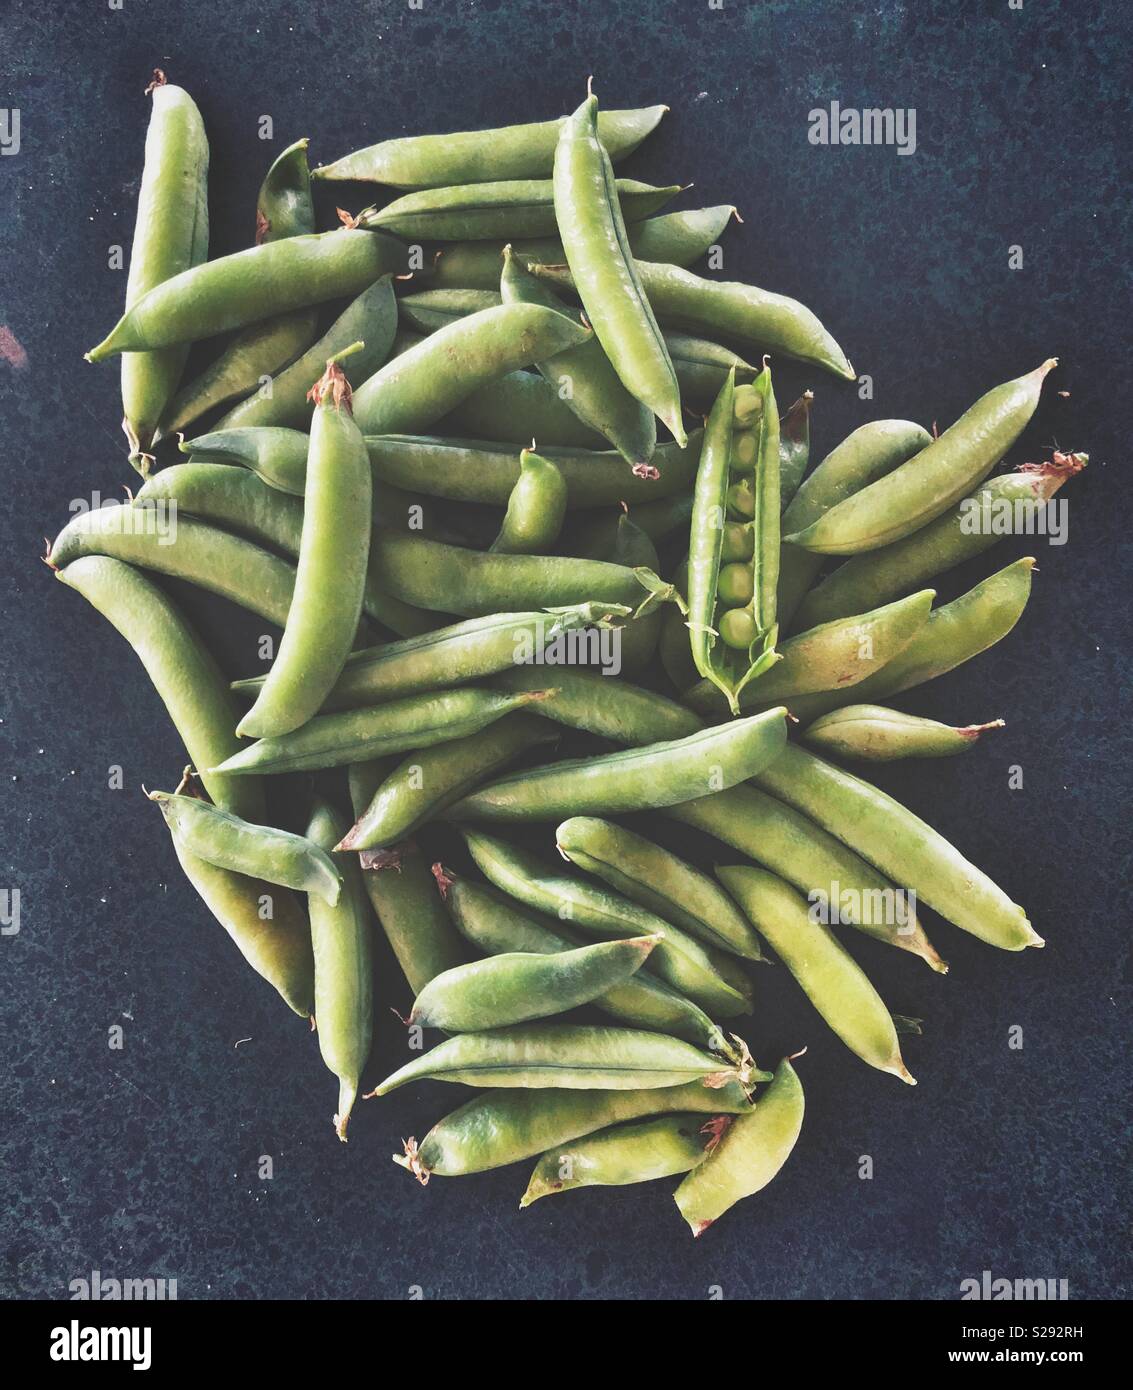 Fresh harvest of peas in a pod on a dark kitchen counter Stock Photo